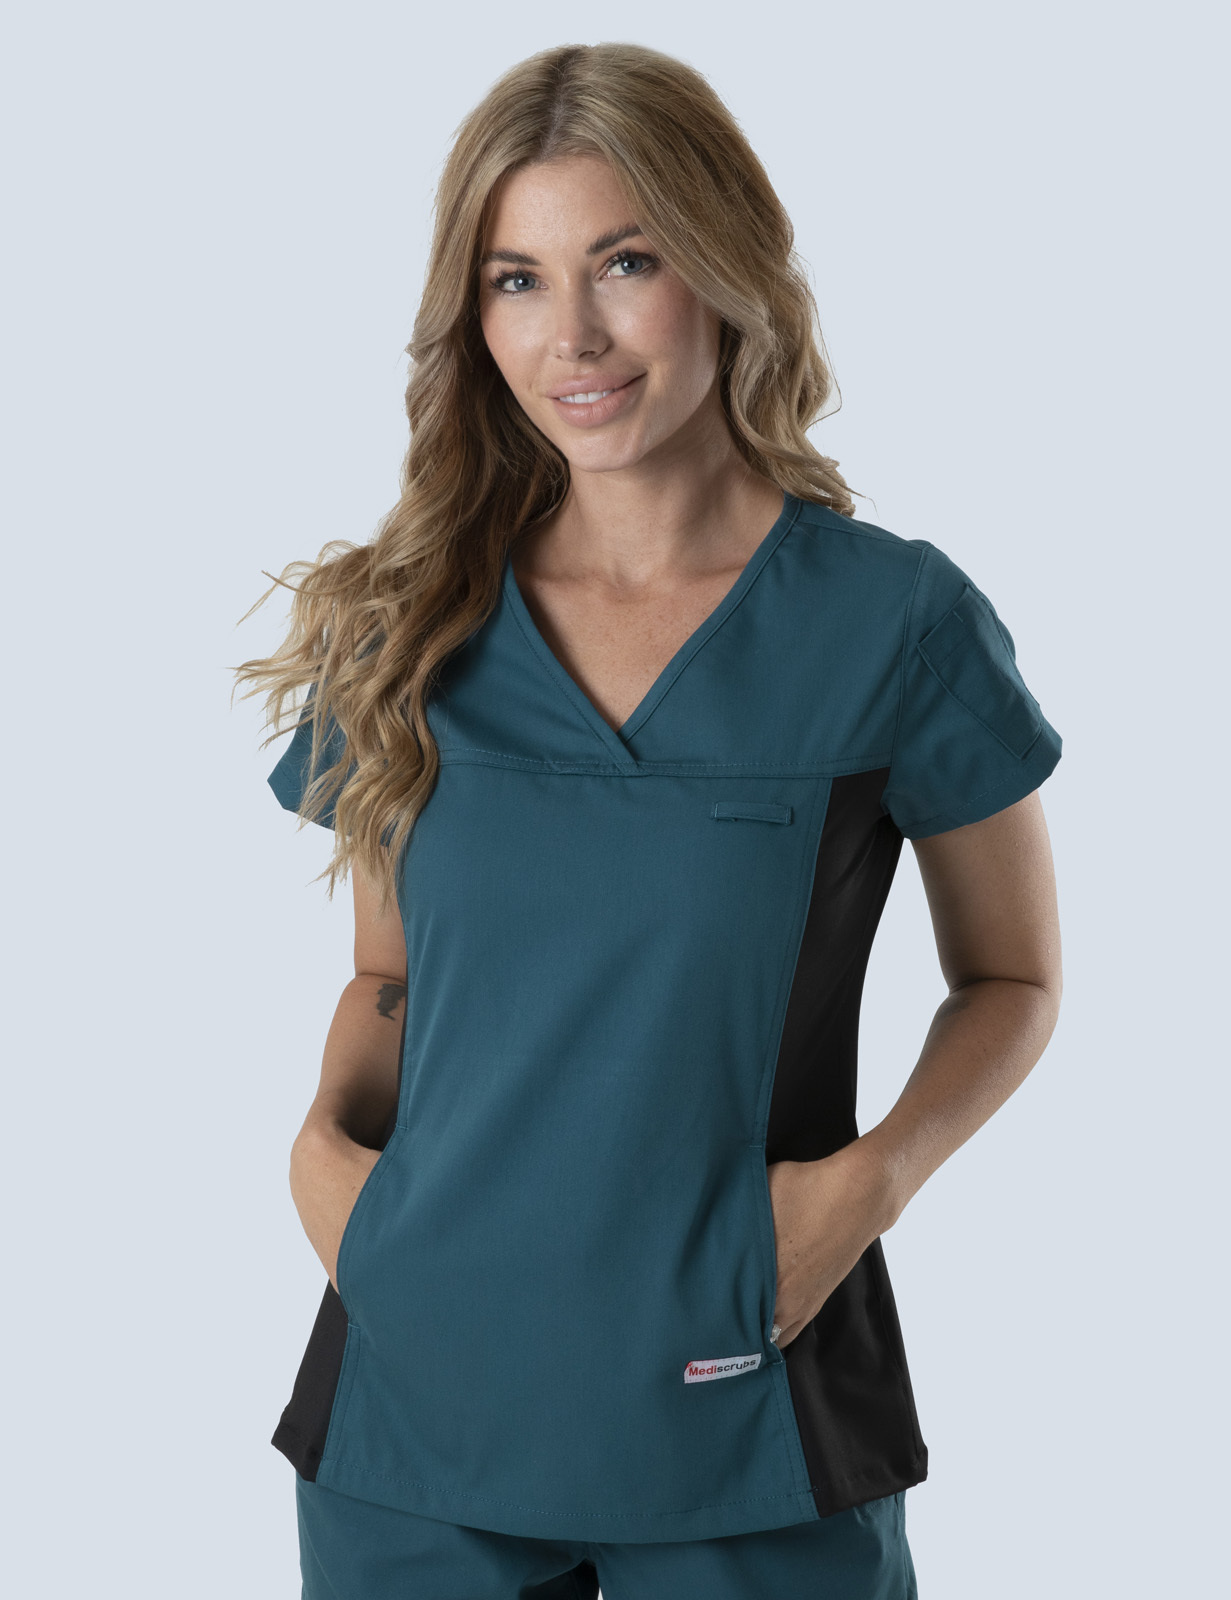 Women's Fit Solid Scrub Top With Spandex Panel - Caribbean - Medium